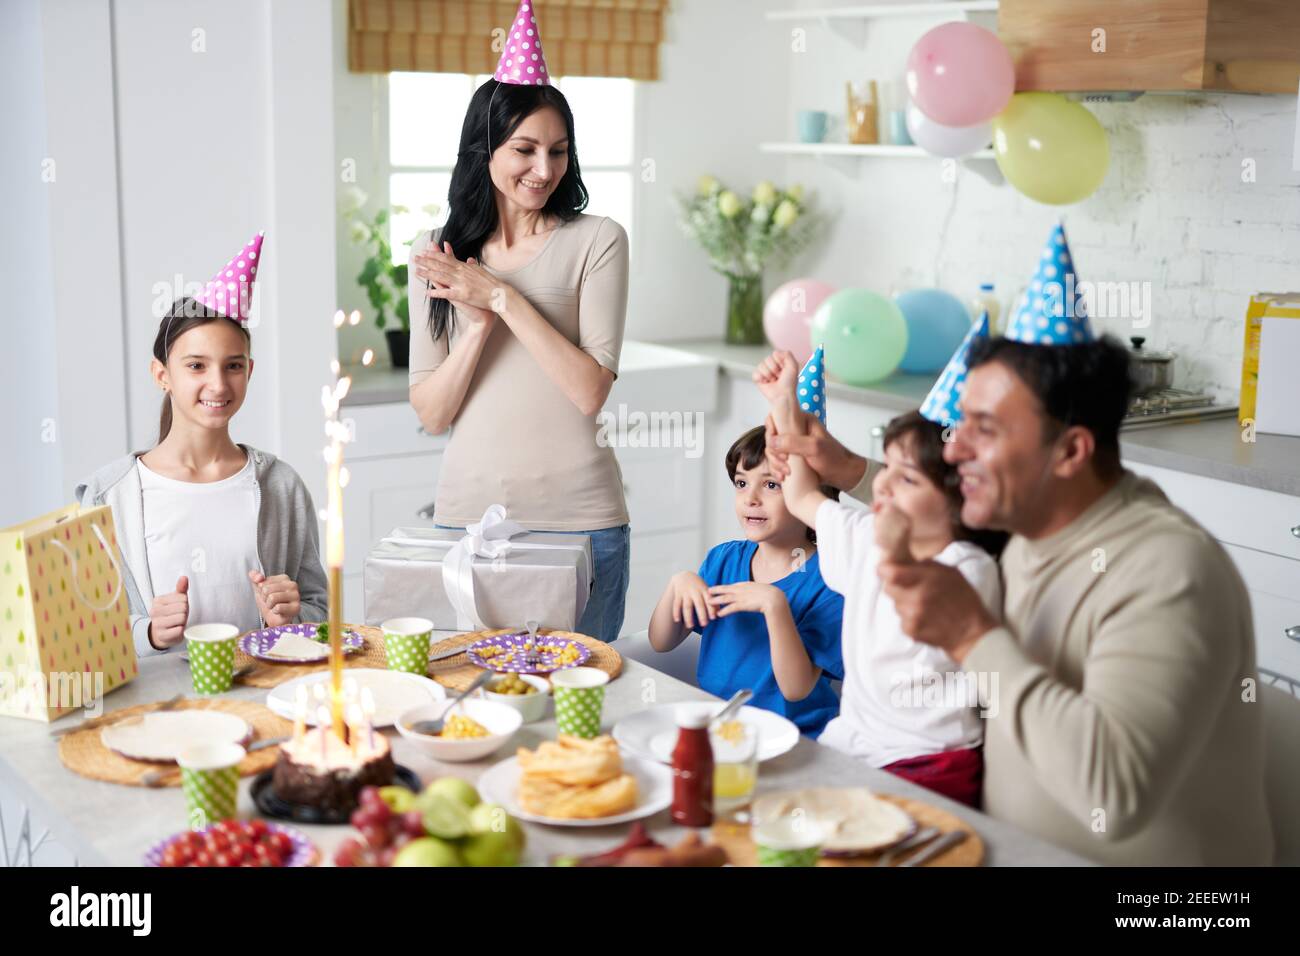 Cheerful latin family with children wearing birthday caps on heads looking happy while celebrating birthday together at home. Parenthood, celebration concept Stock Photo